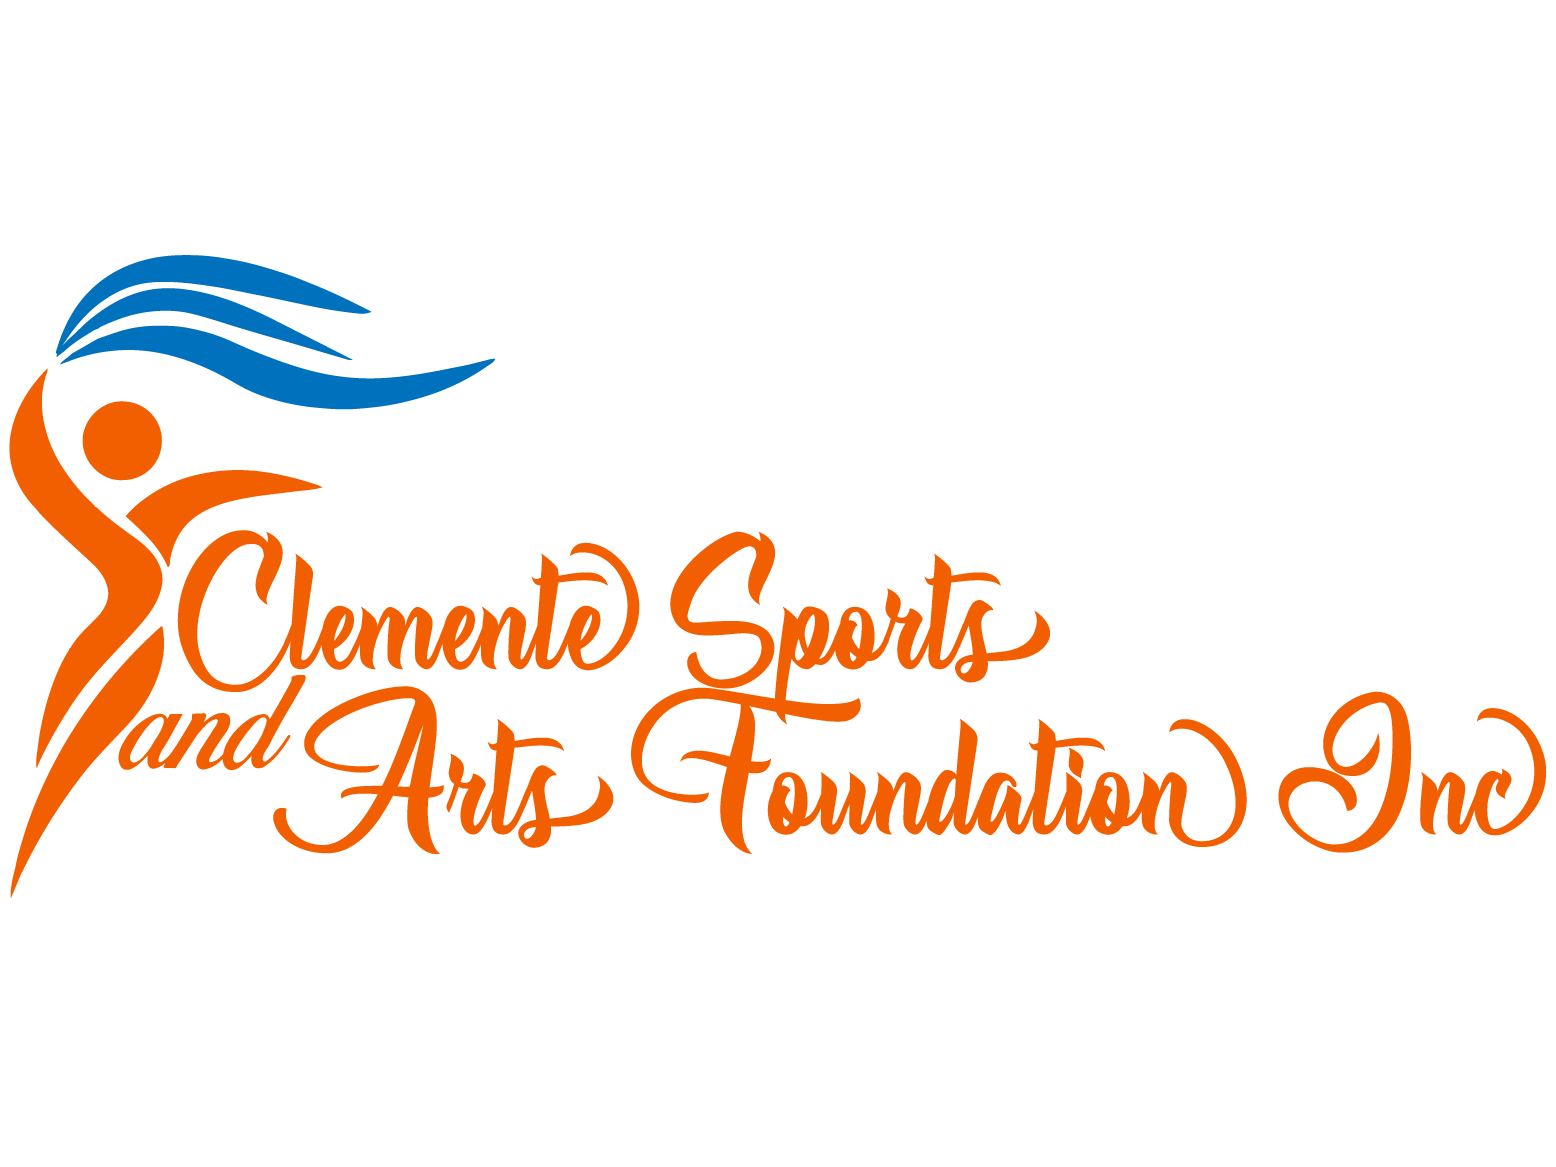 Clemente Sports and Arts Foundation